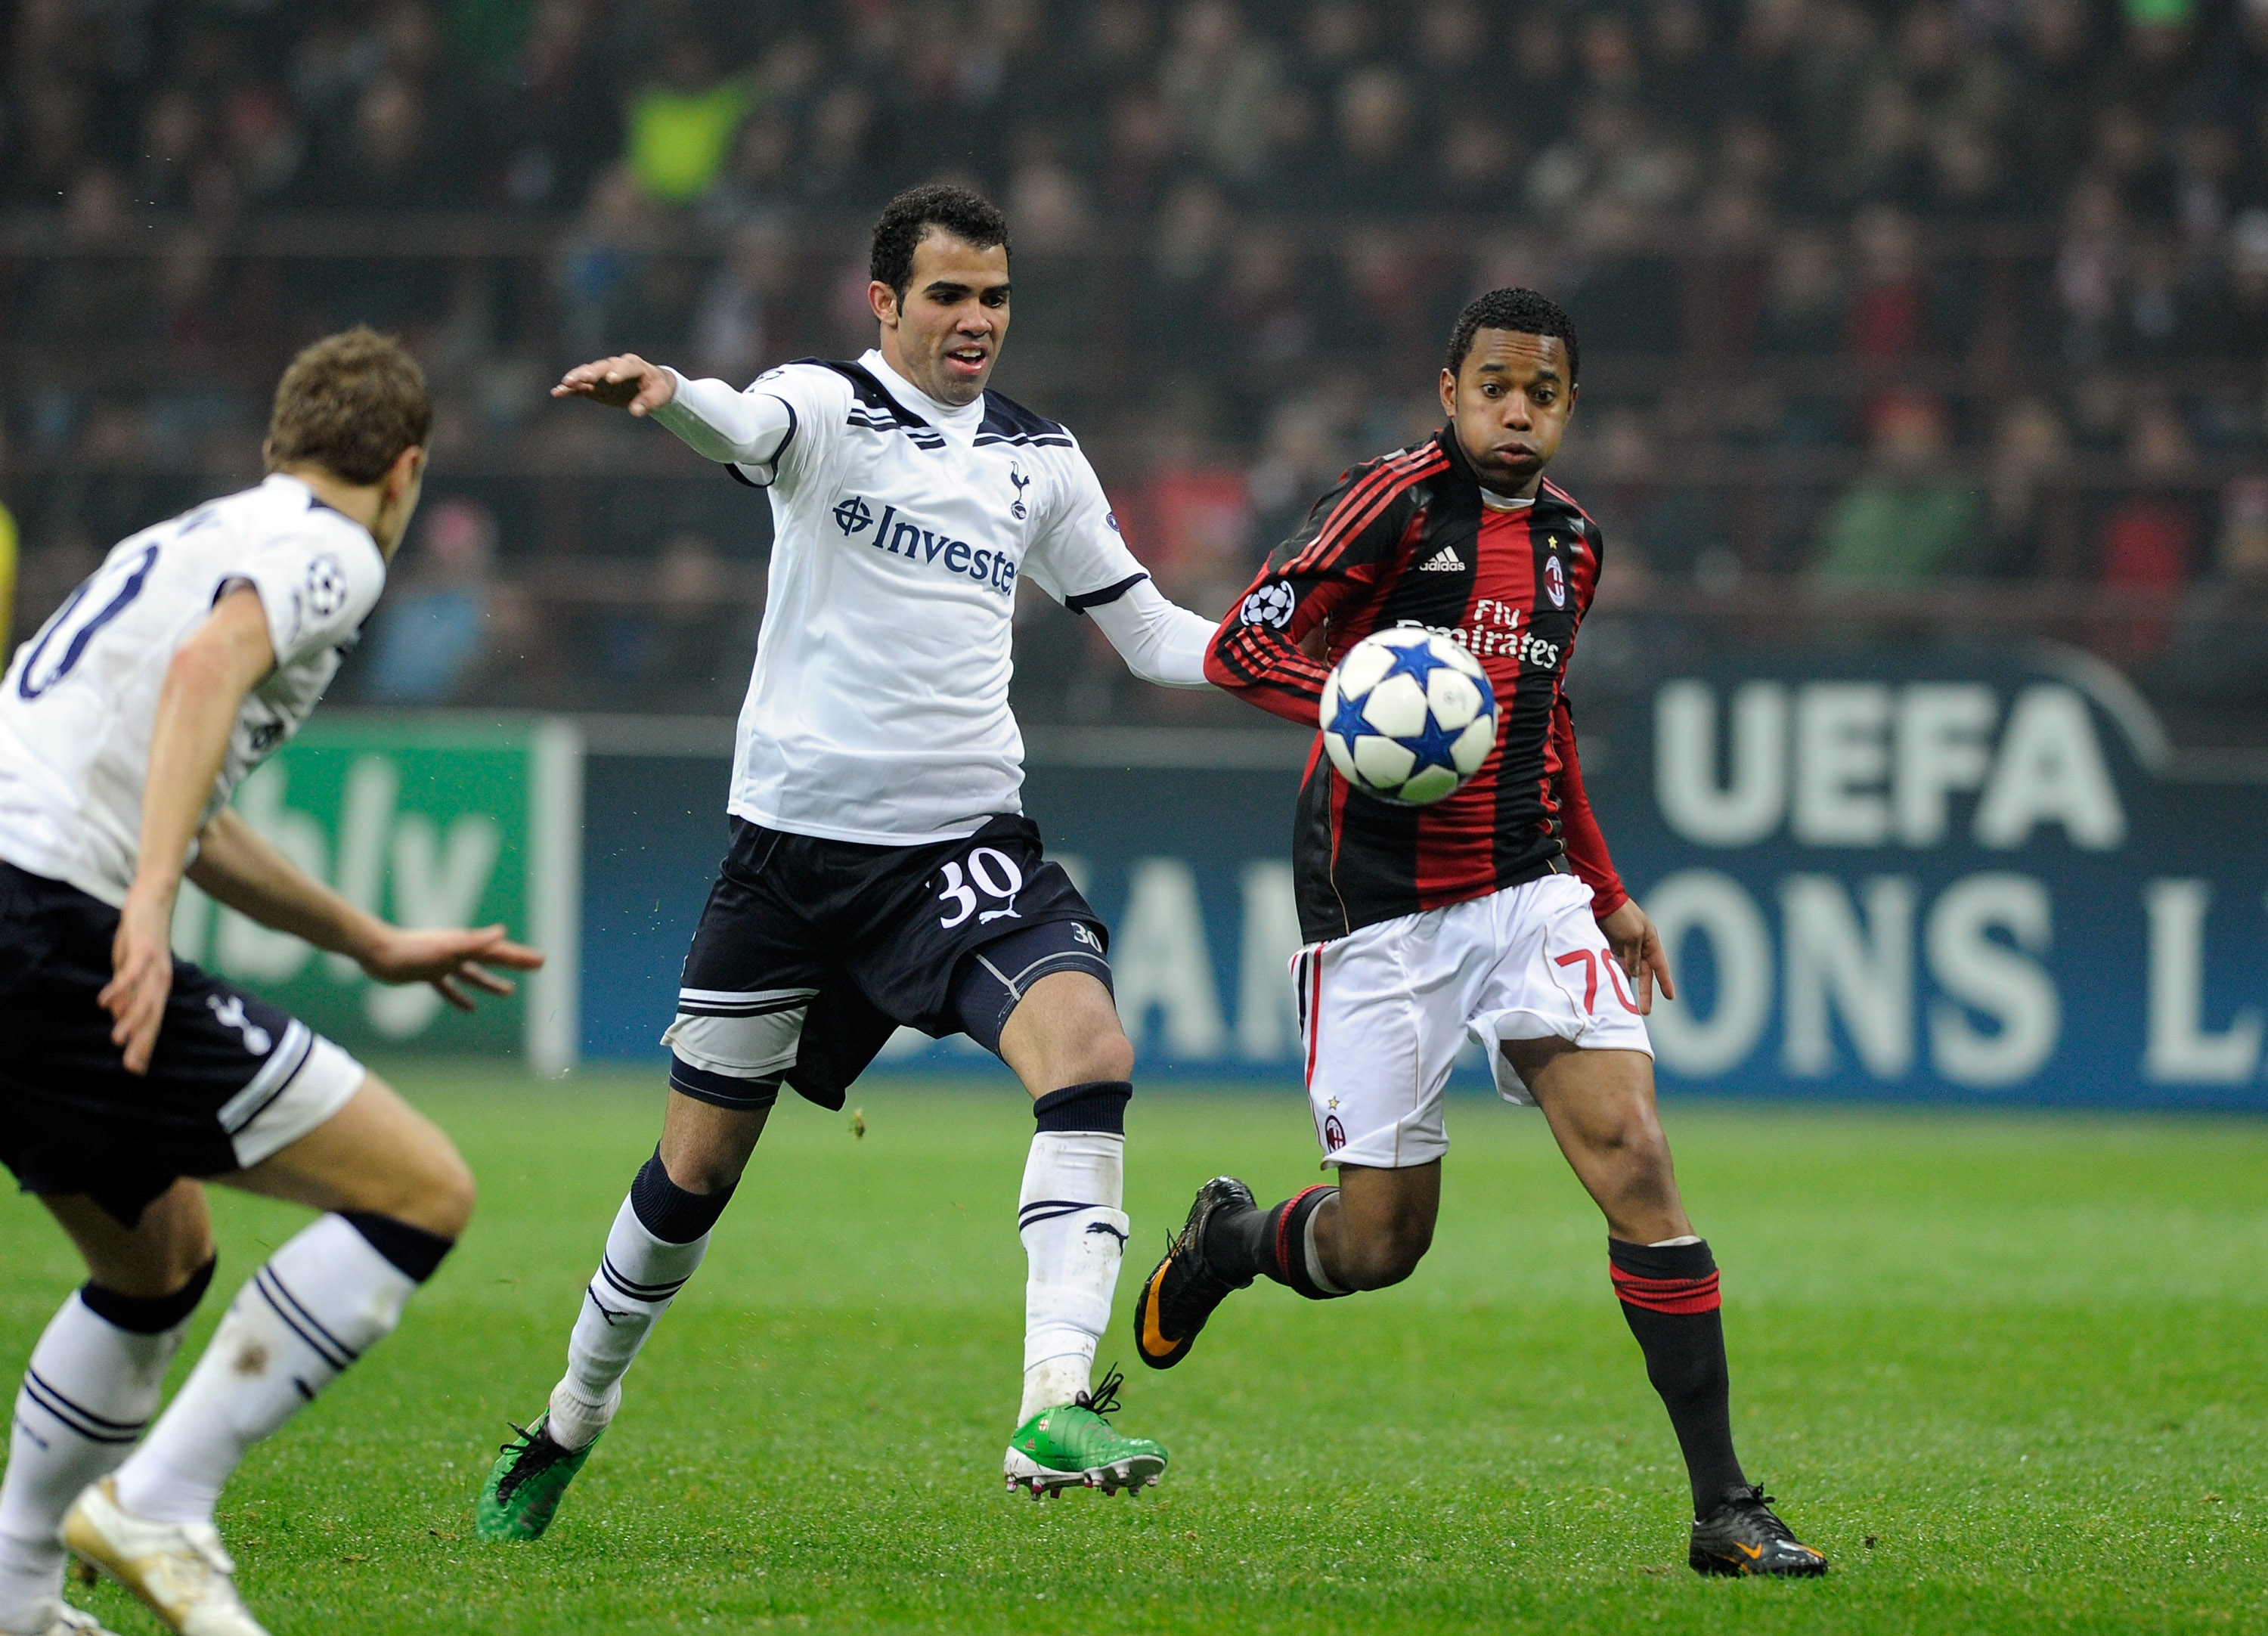 MILAN, ITALY - FEBRUARY 15:  Robinho of AC Milan and Sandro of Tottenham Hotspur during the UEFA Champions League round of 16 first leg match between AC Milan and Tottenham Hotspur at Stadio Giuseppe Meazza on February 15, 2011 in Milan, Italy.  (Photo by